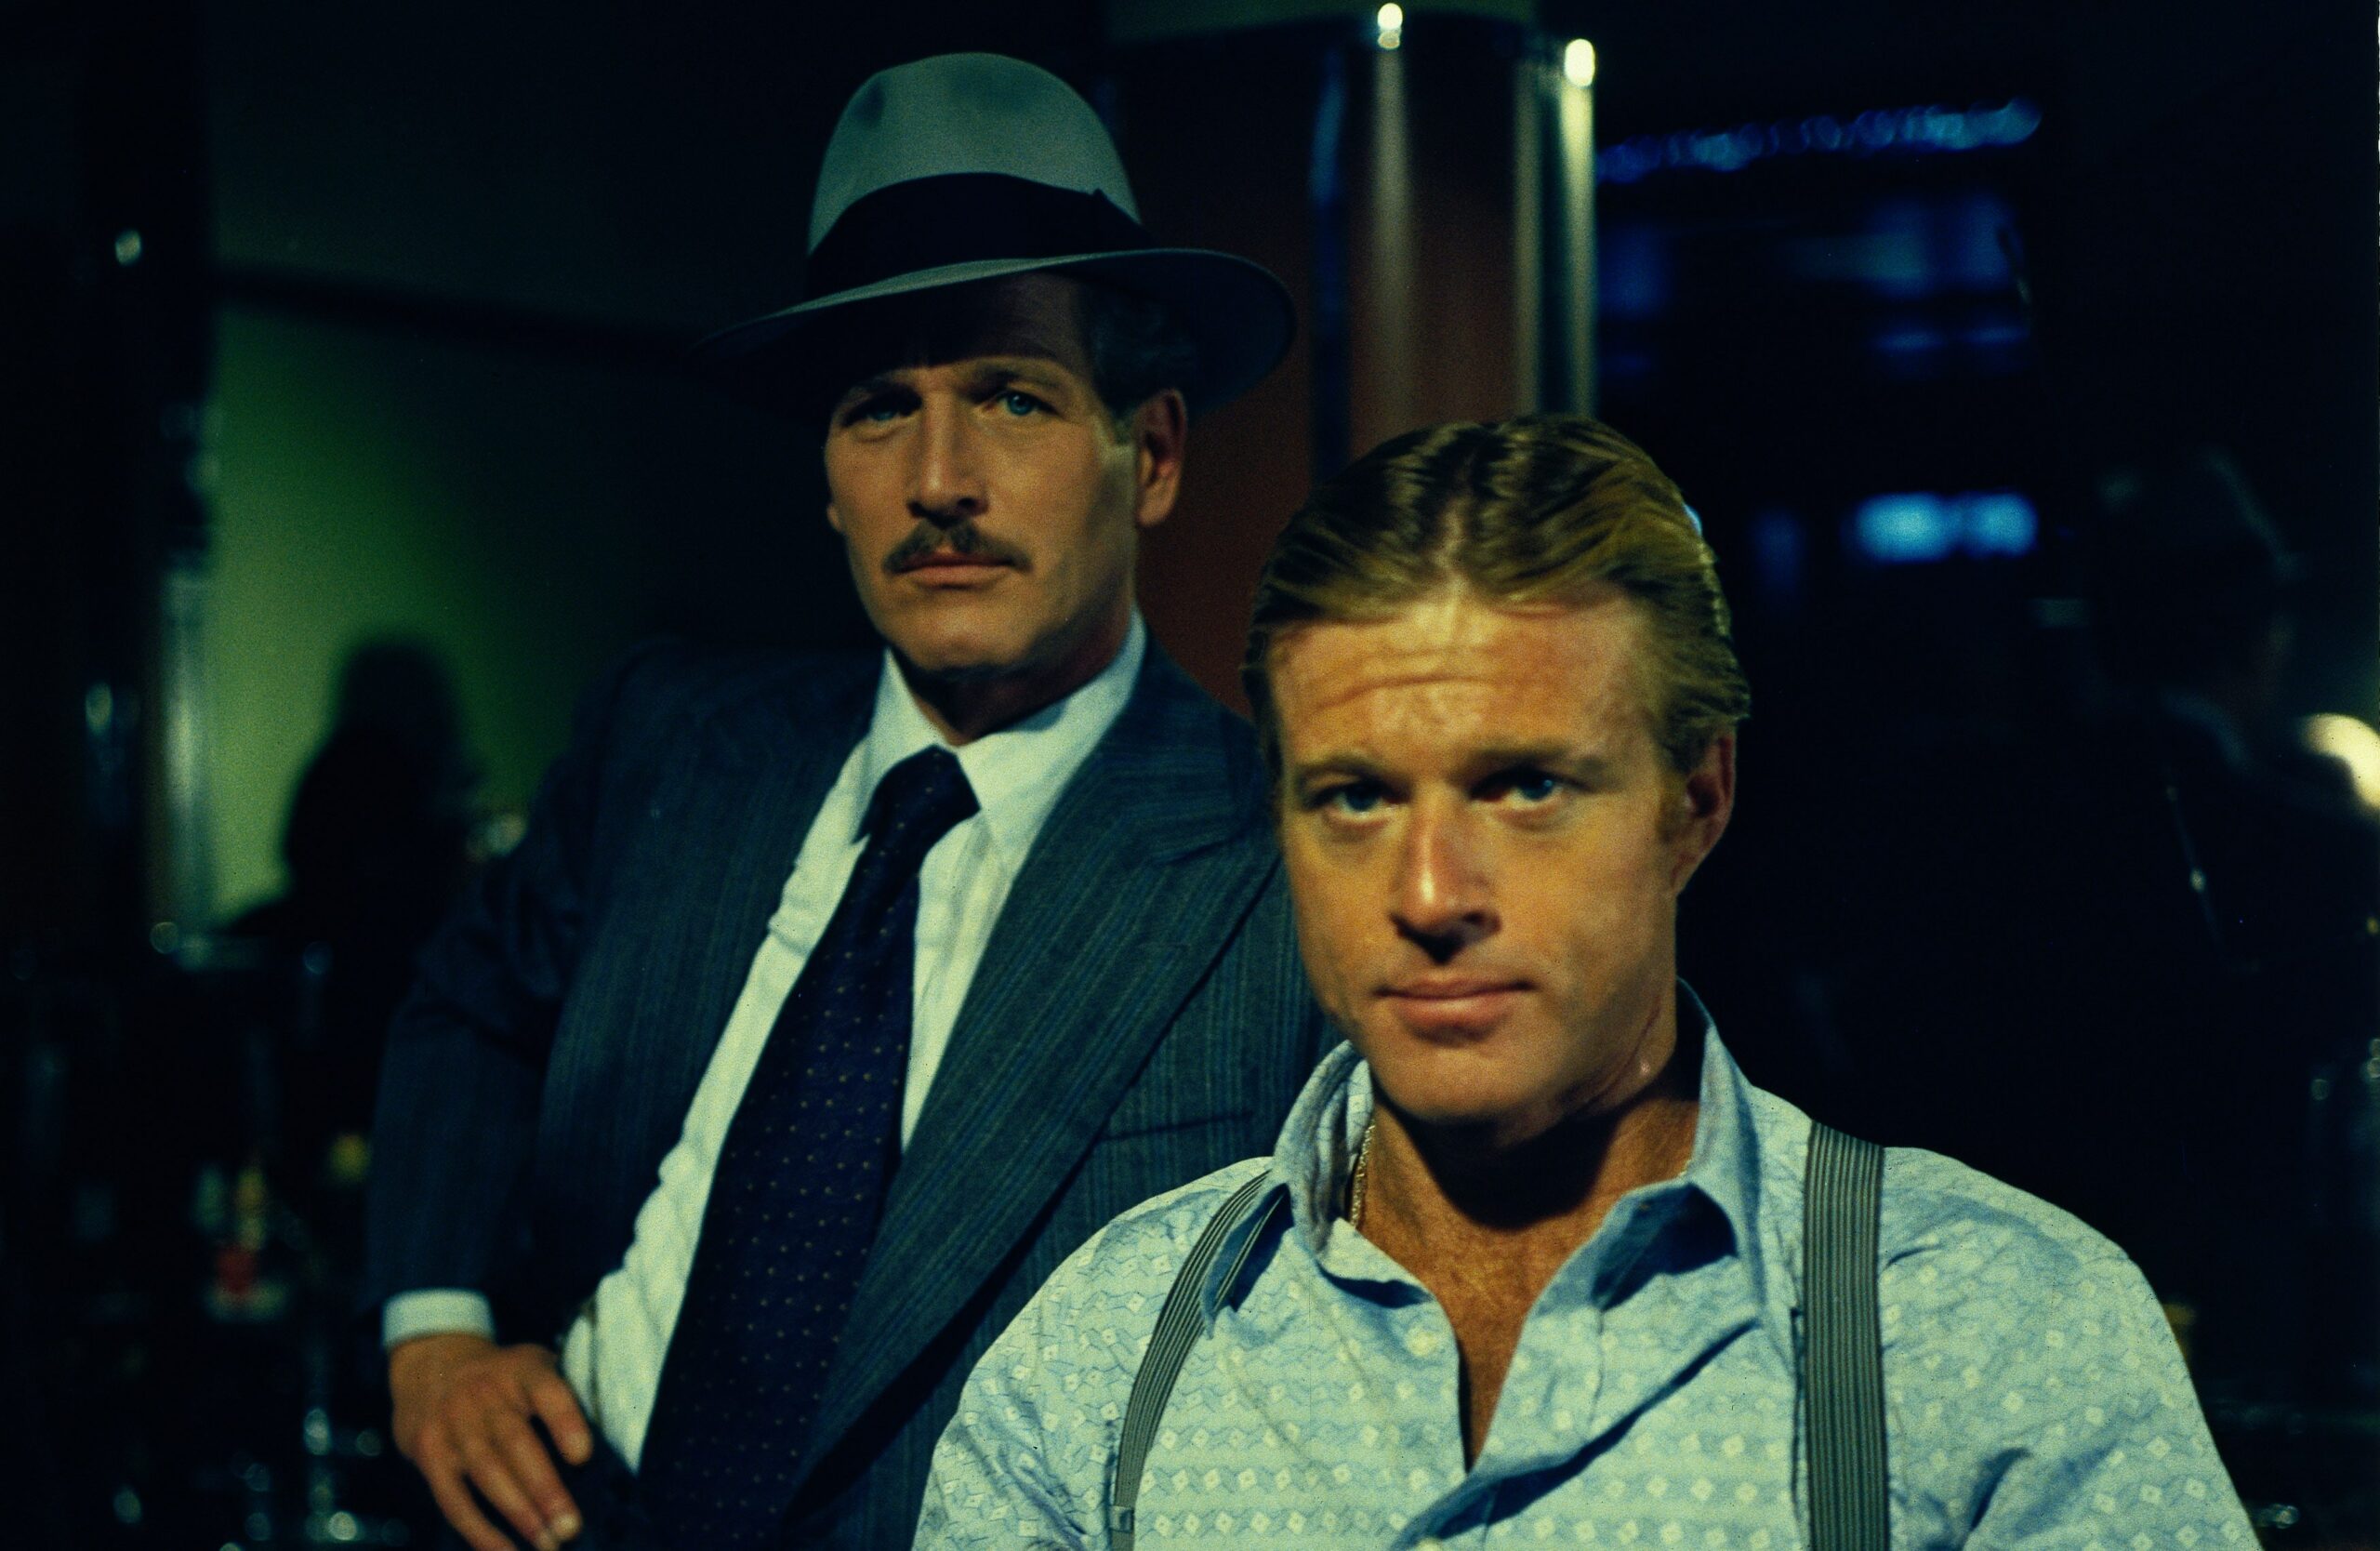 Paul Newman and Robert Redford in The Sting.